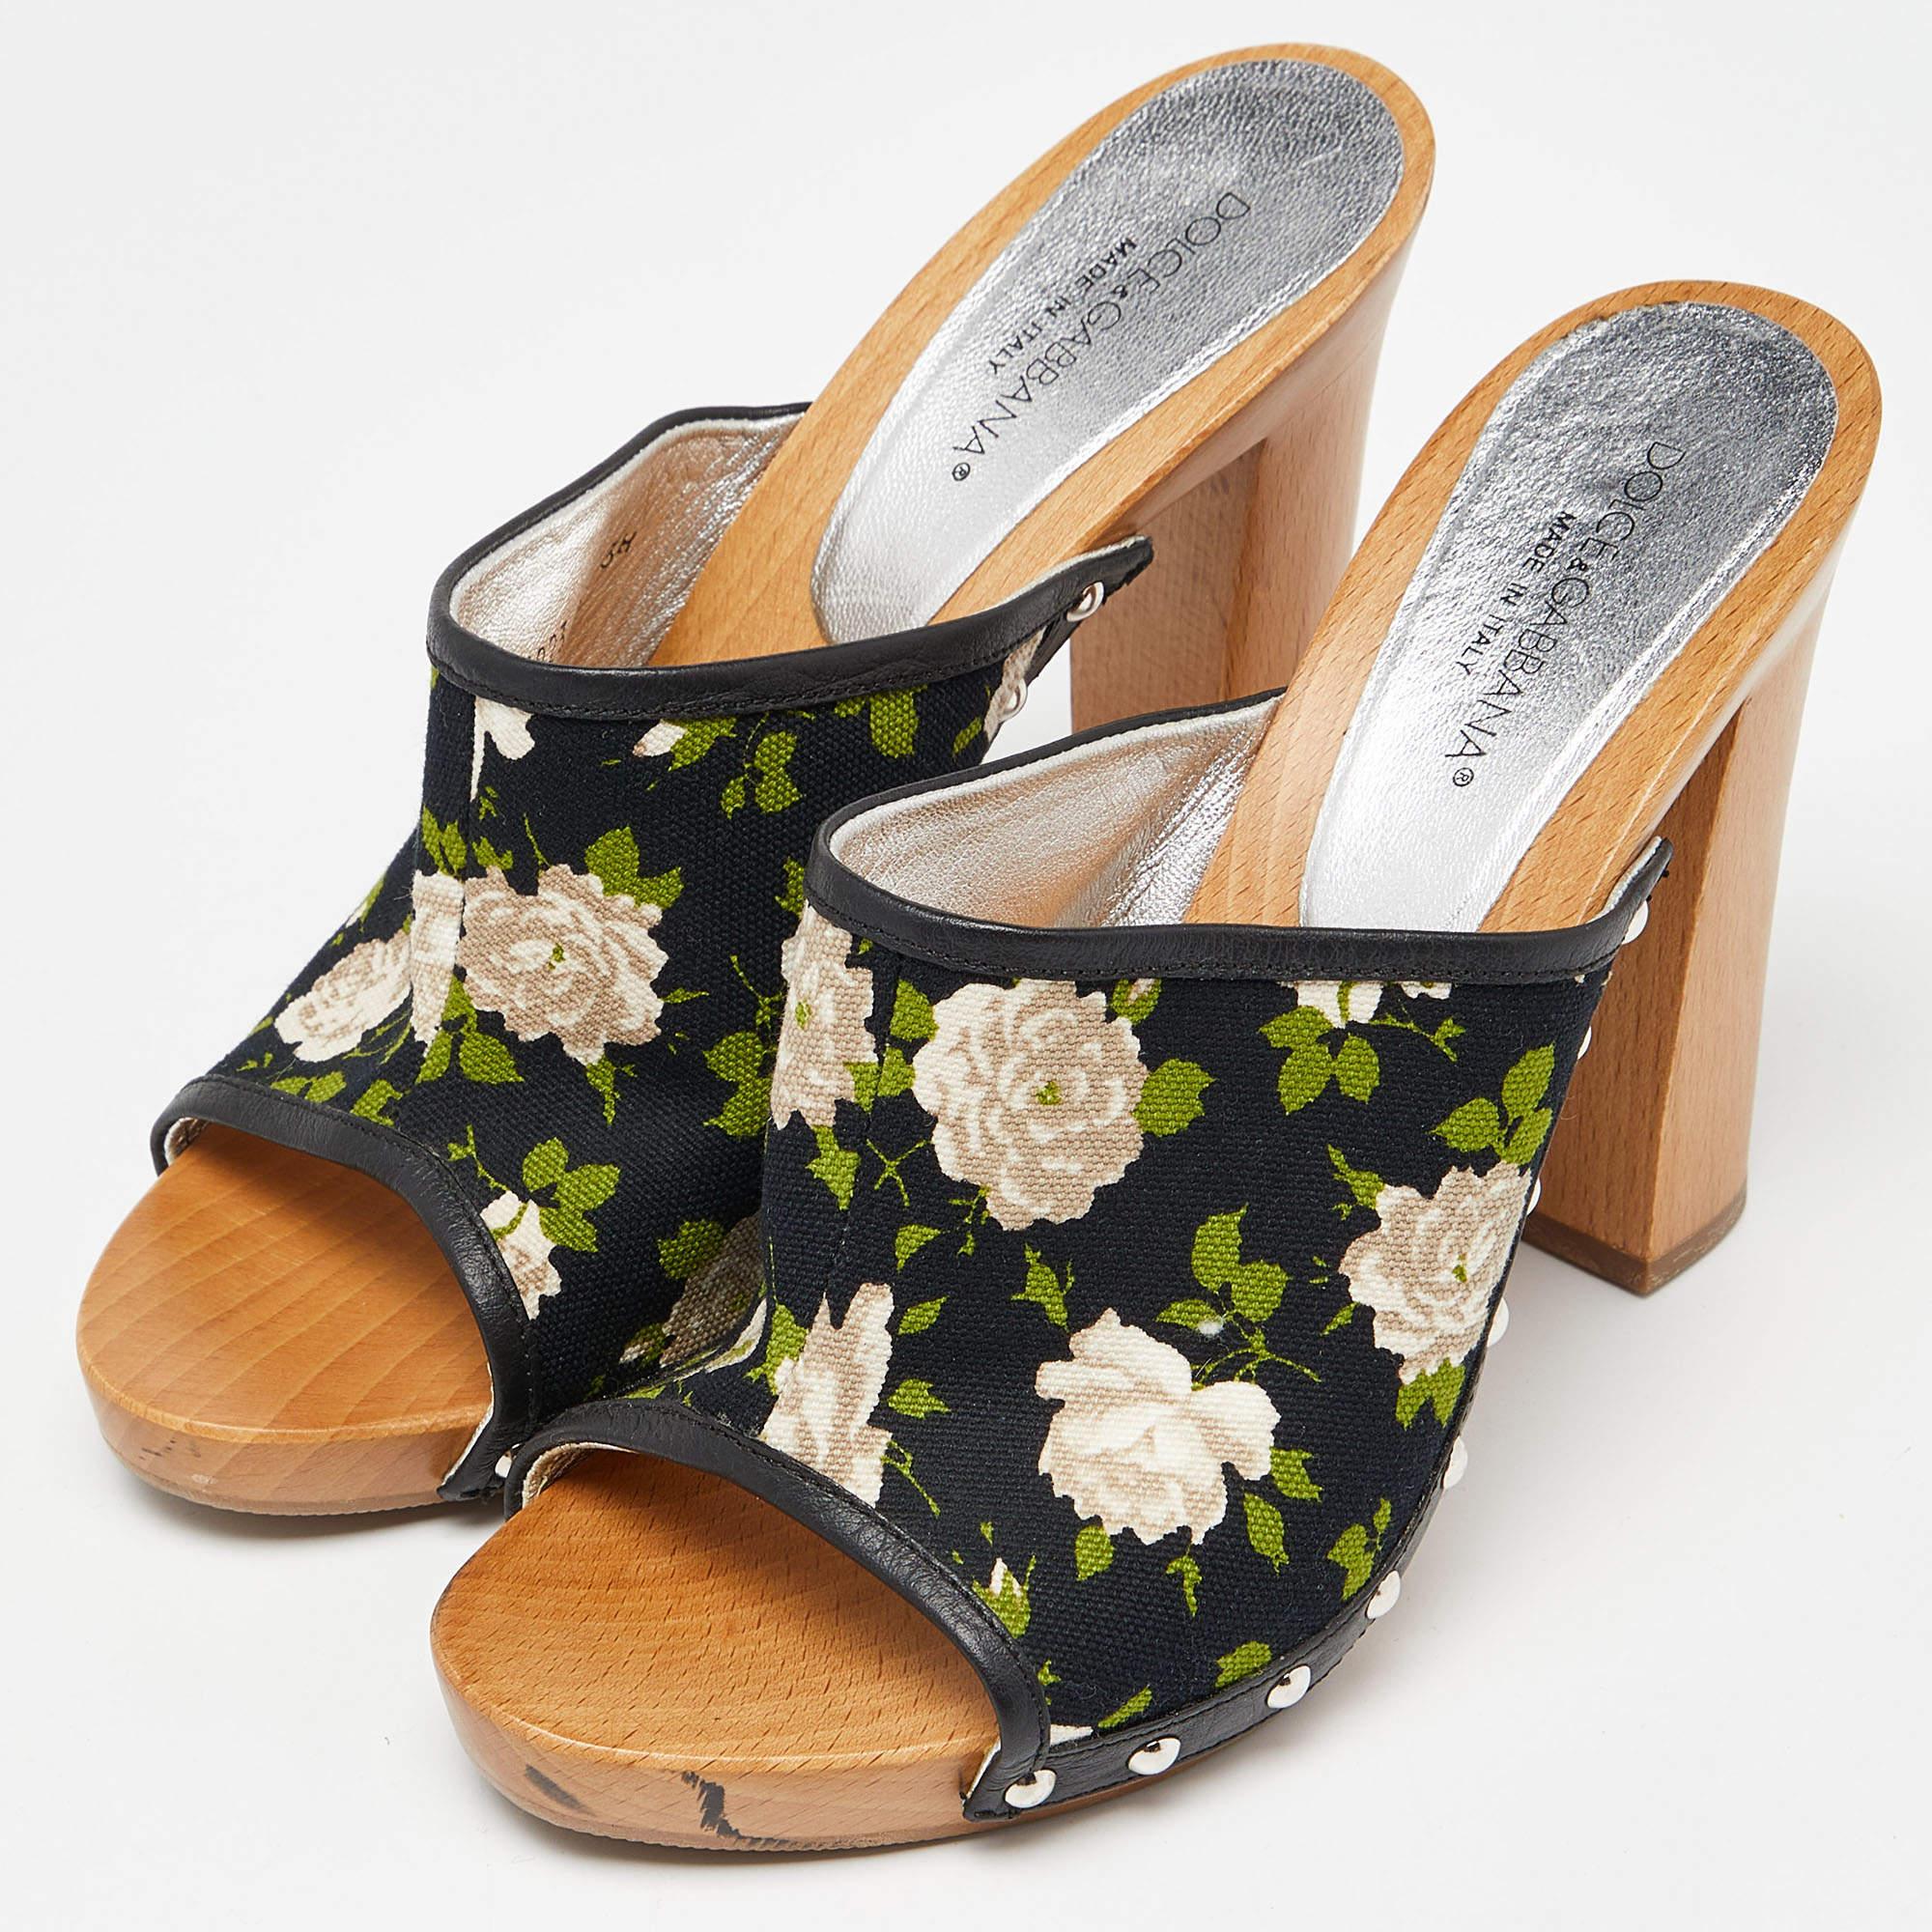 Dolce & Gabbana Mukticolor Floral Canvas and Leather Block Heel Mules Size 38 In Good Condition For Sale In Dubai, Al Qouz 2